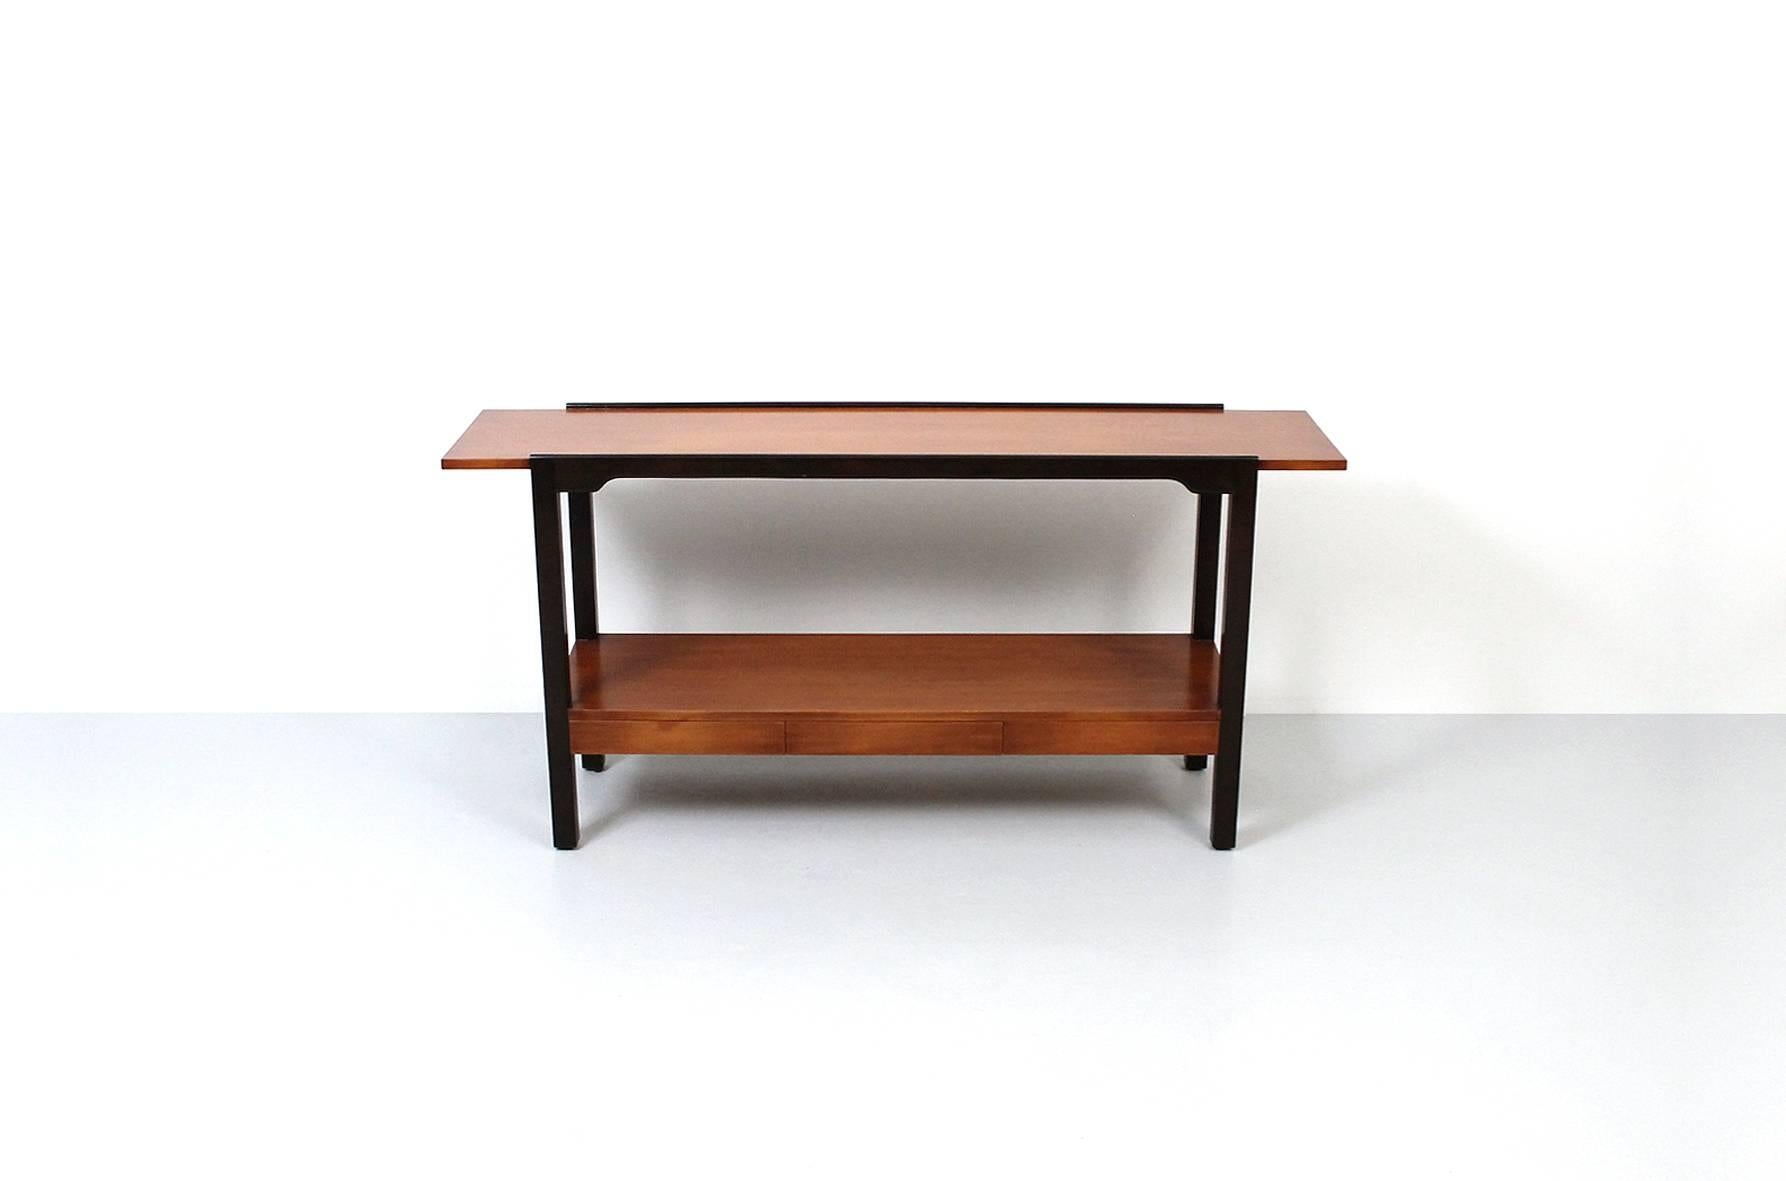 Architectural console table with three drawers. Useful design and proportion. Attributed to Edward Wormley for Dunbar.